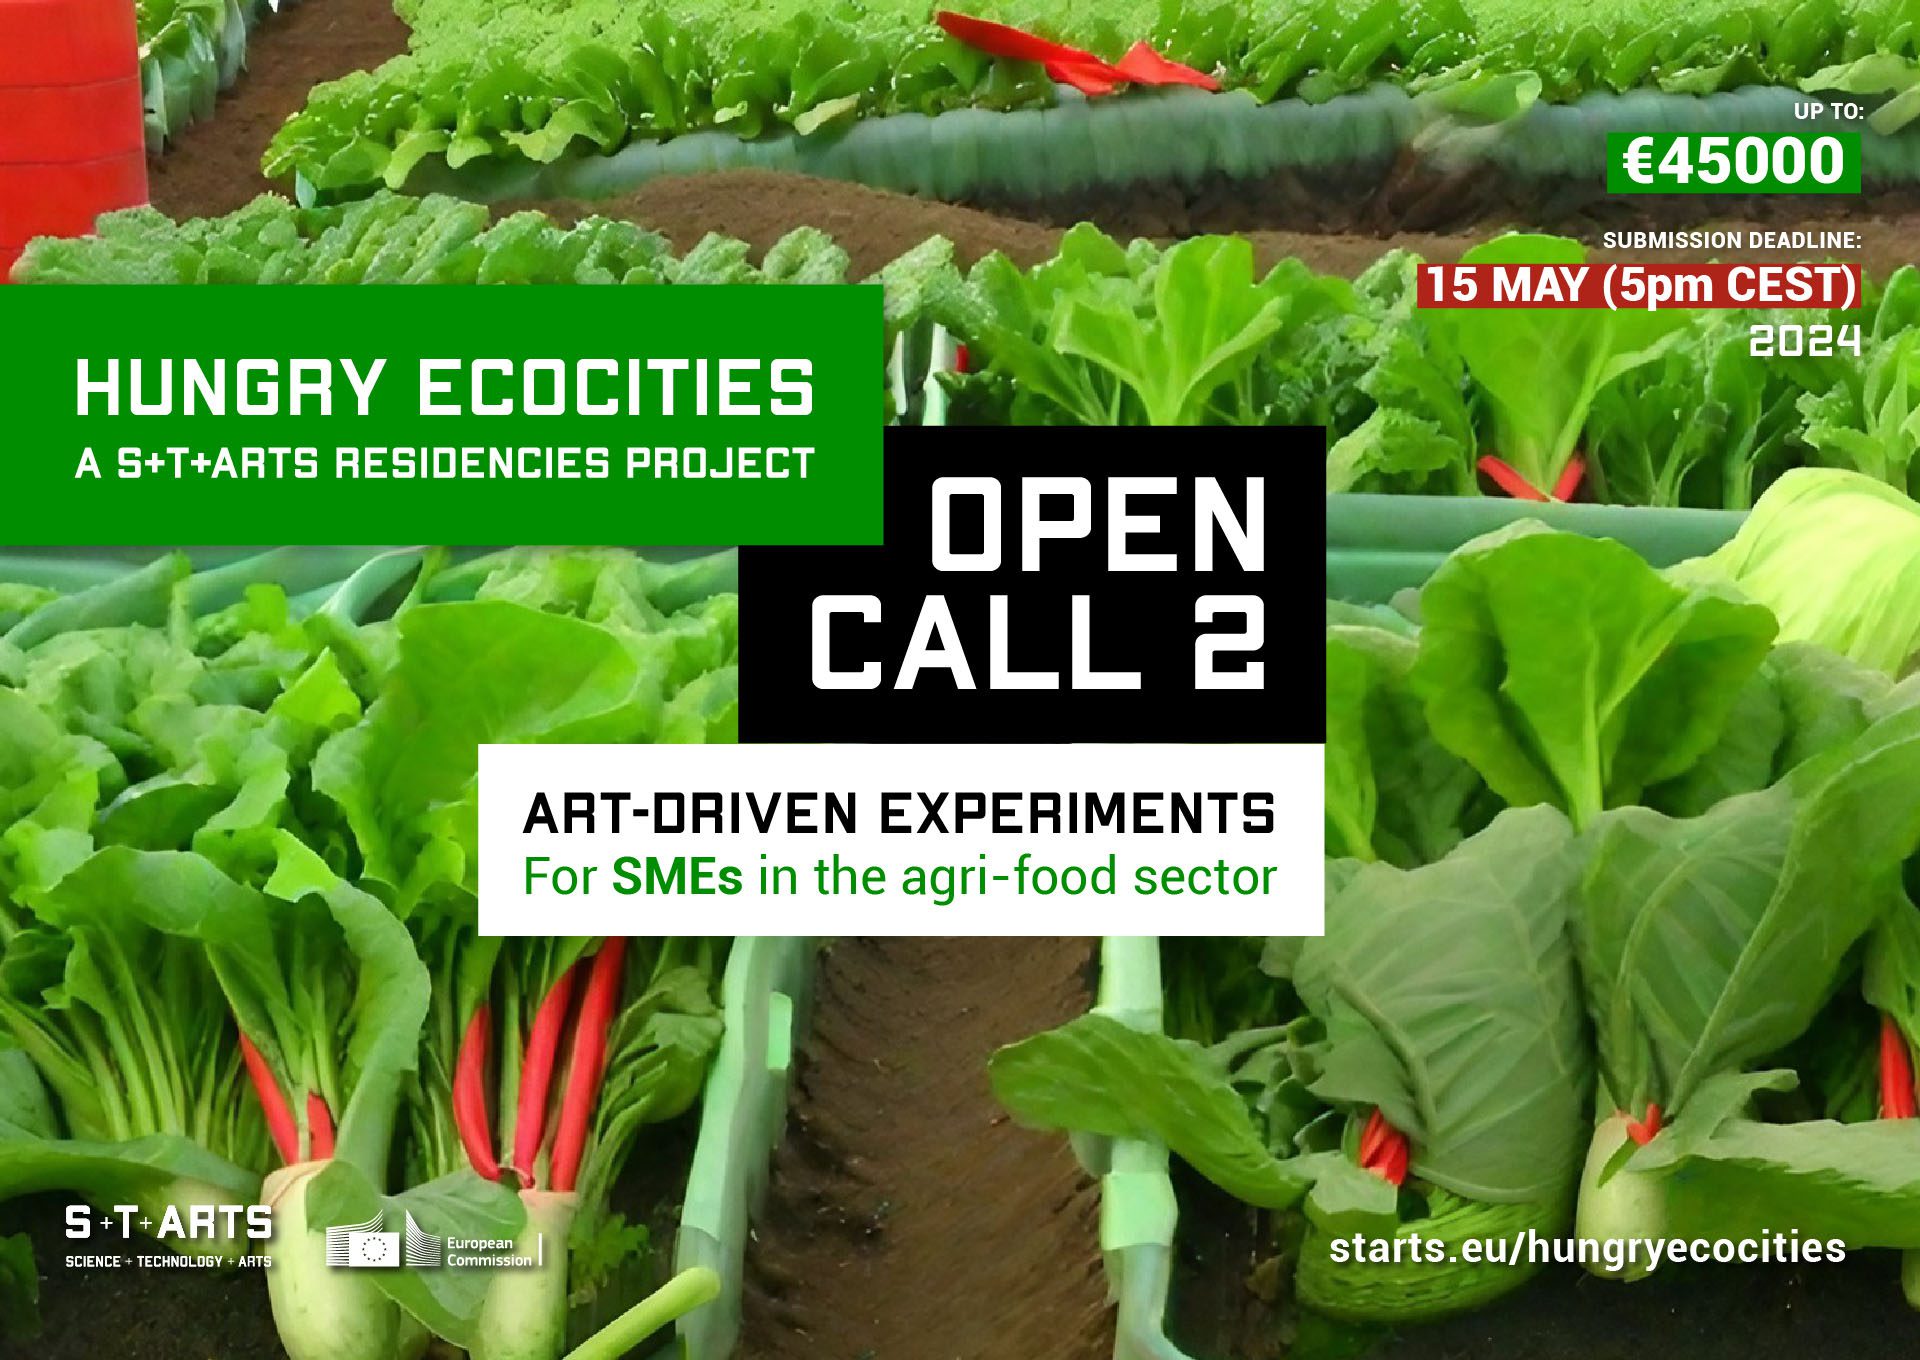 S+T+ARTS Hungry Ecocities ● 2nd Open Call for SMEs in the agri-food sector